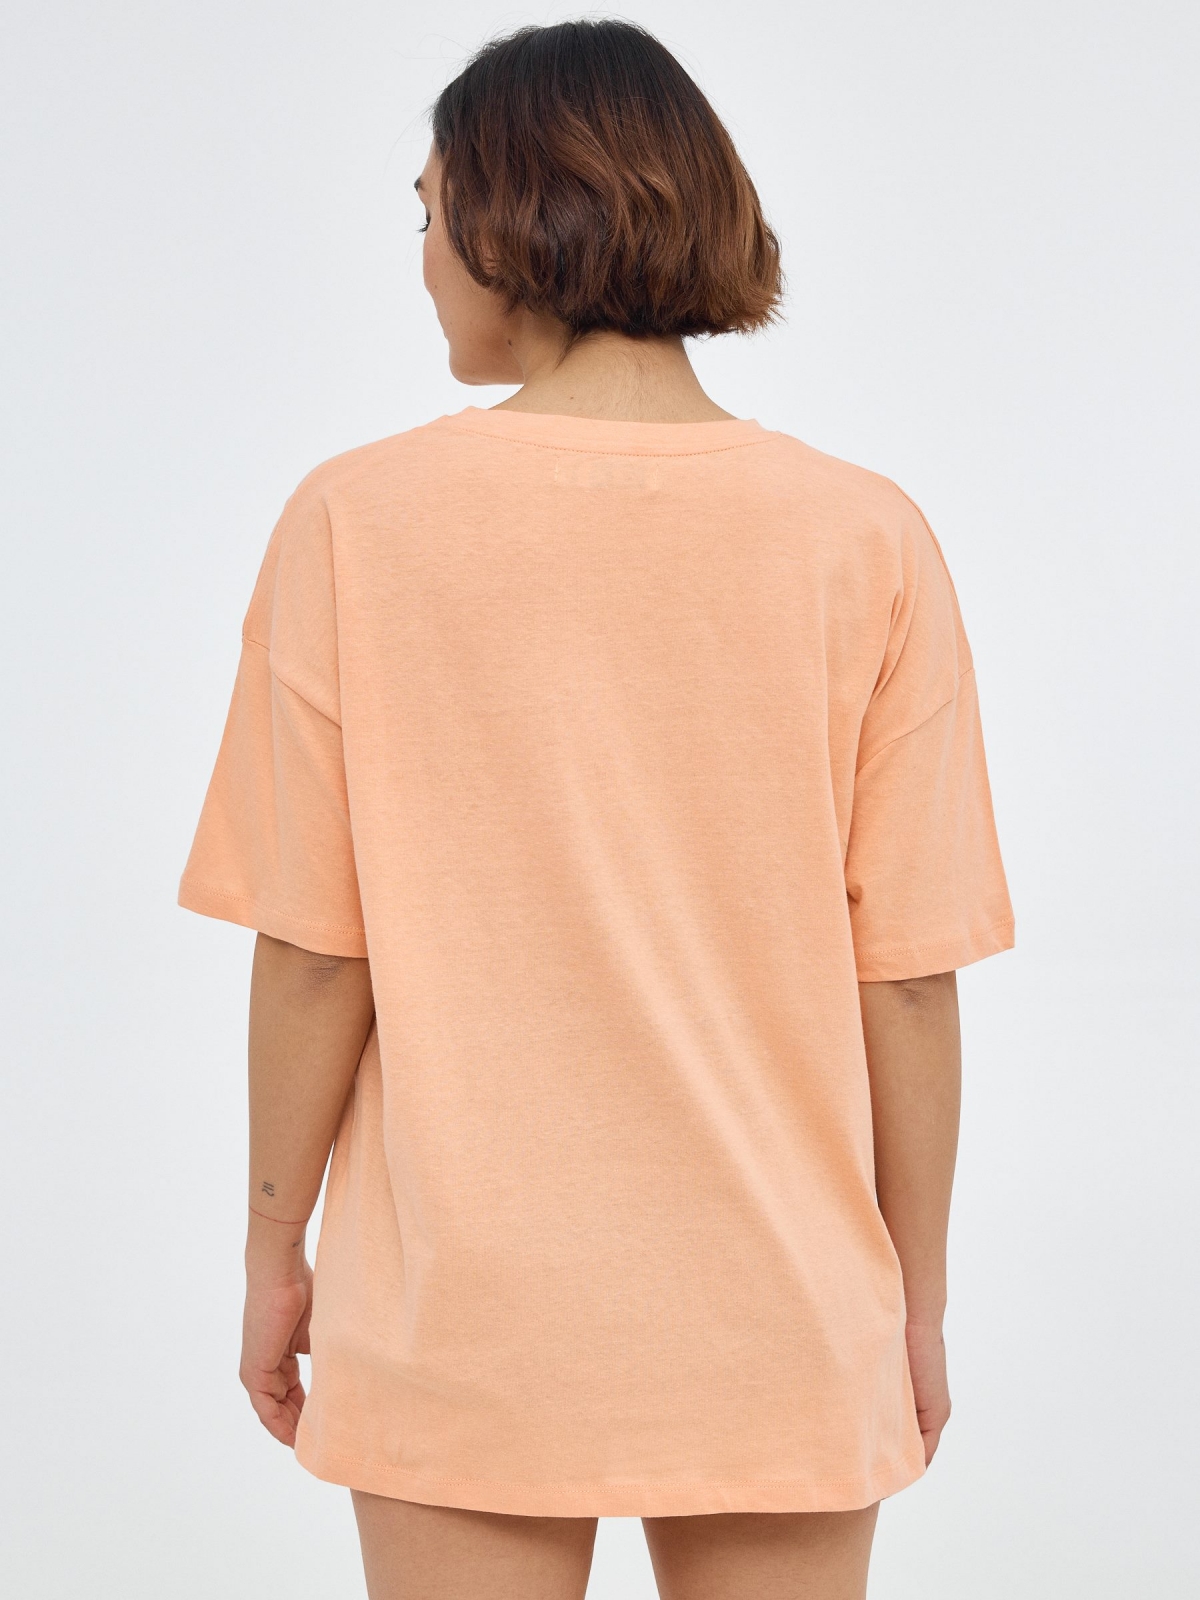 Oversized printed t-shirt peach middle back view